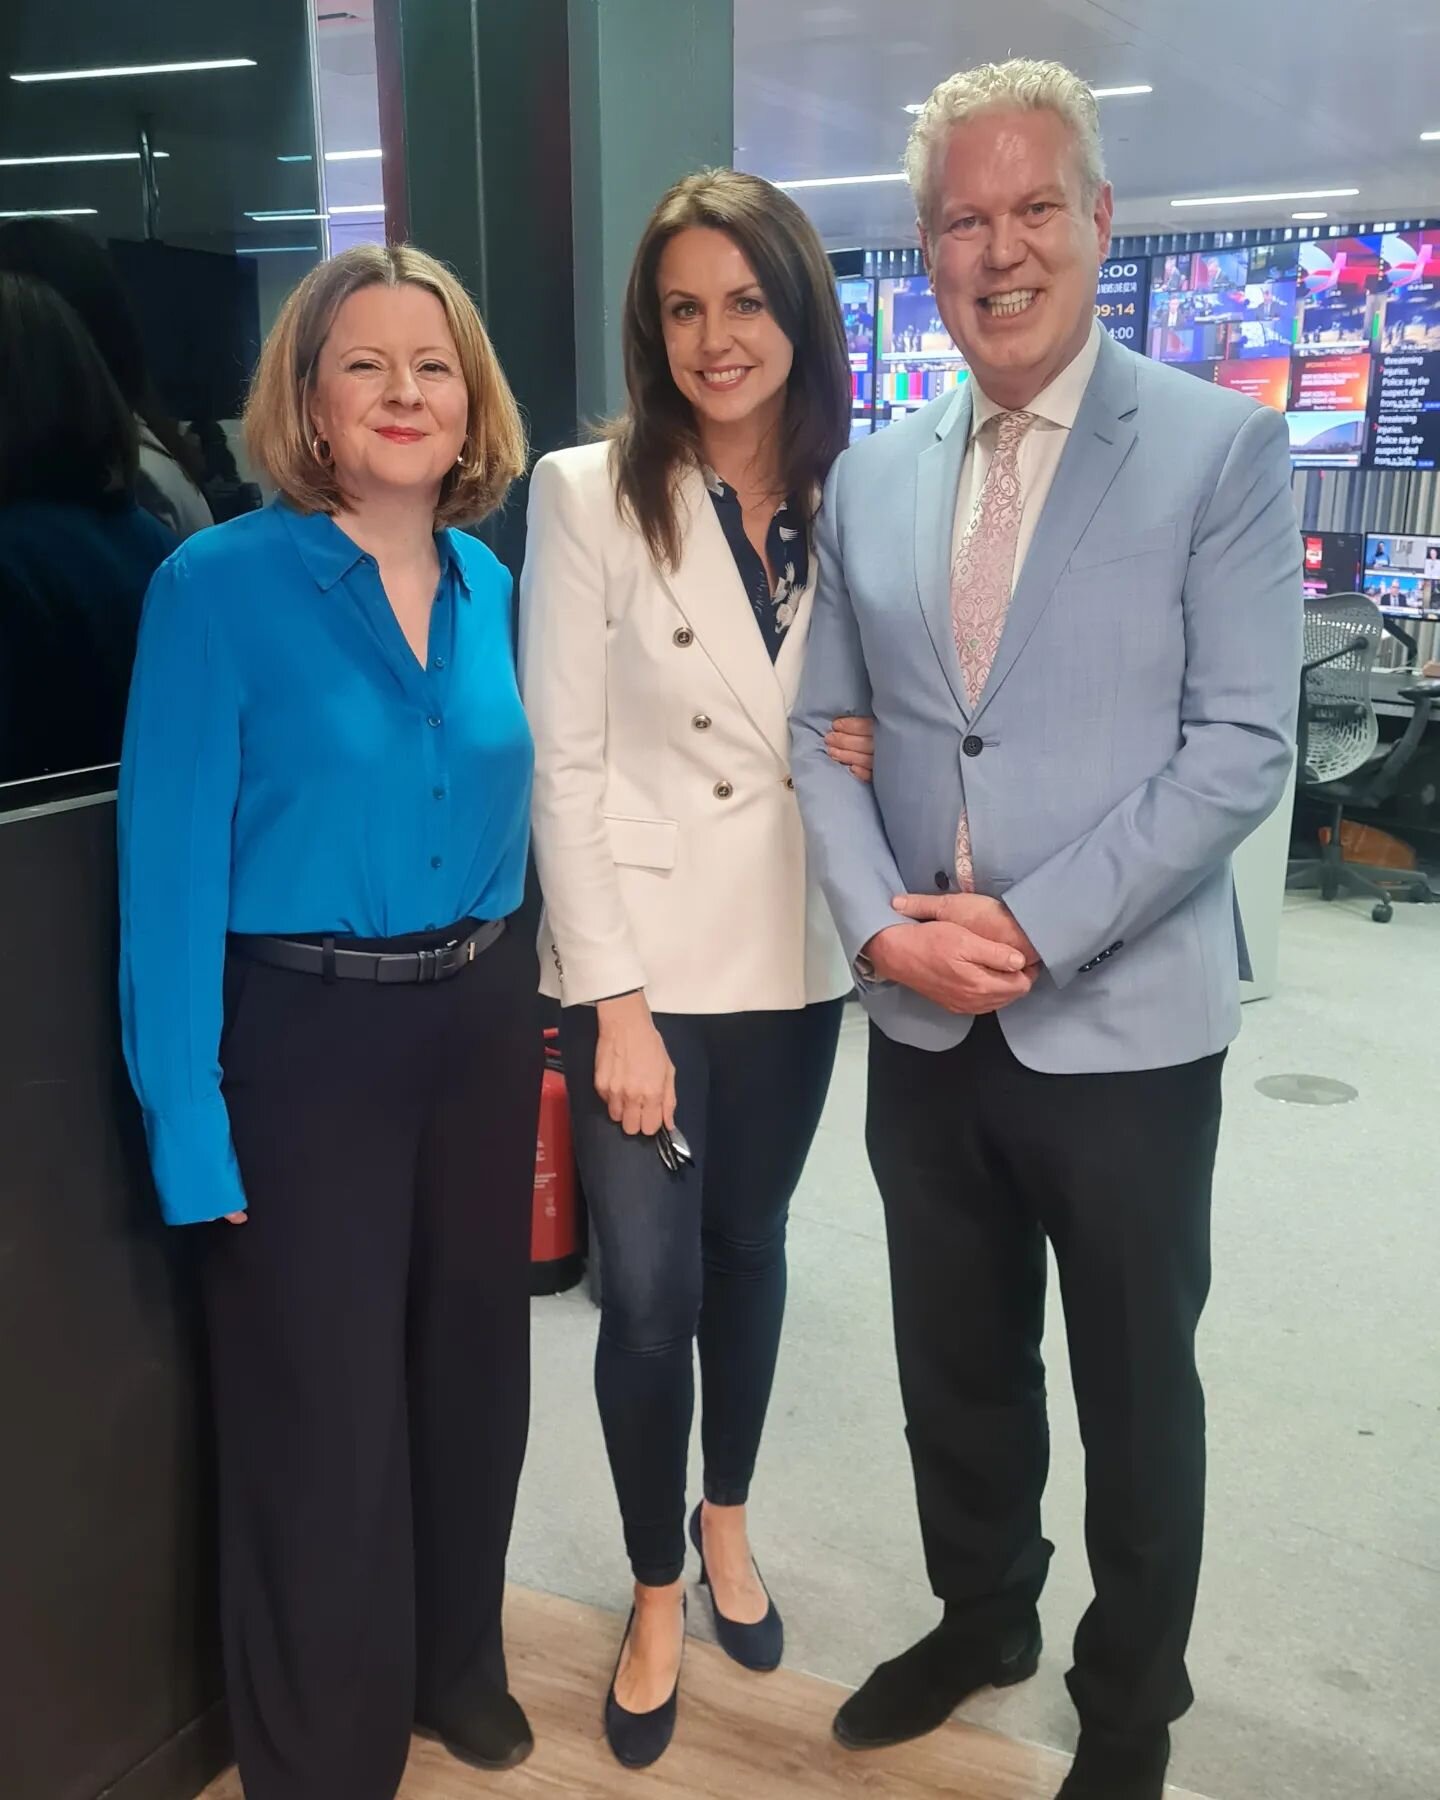 Thanks so much to political editor of The Express, Sam Lister and lawyer Andrew Eborne...
More tomorrow with @toniabuxton and Mike Parry at 10am on @gbnewsonline